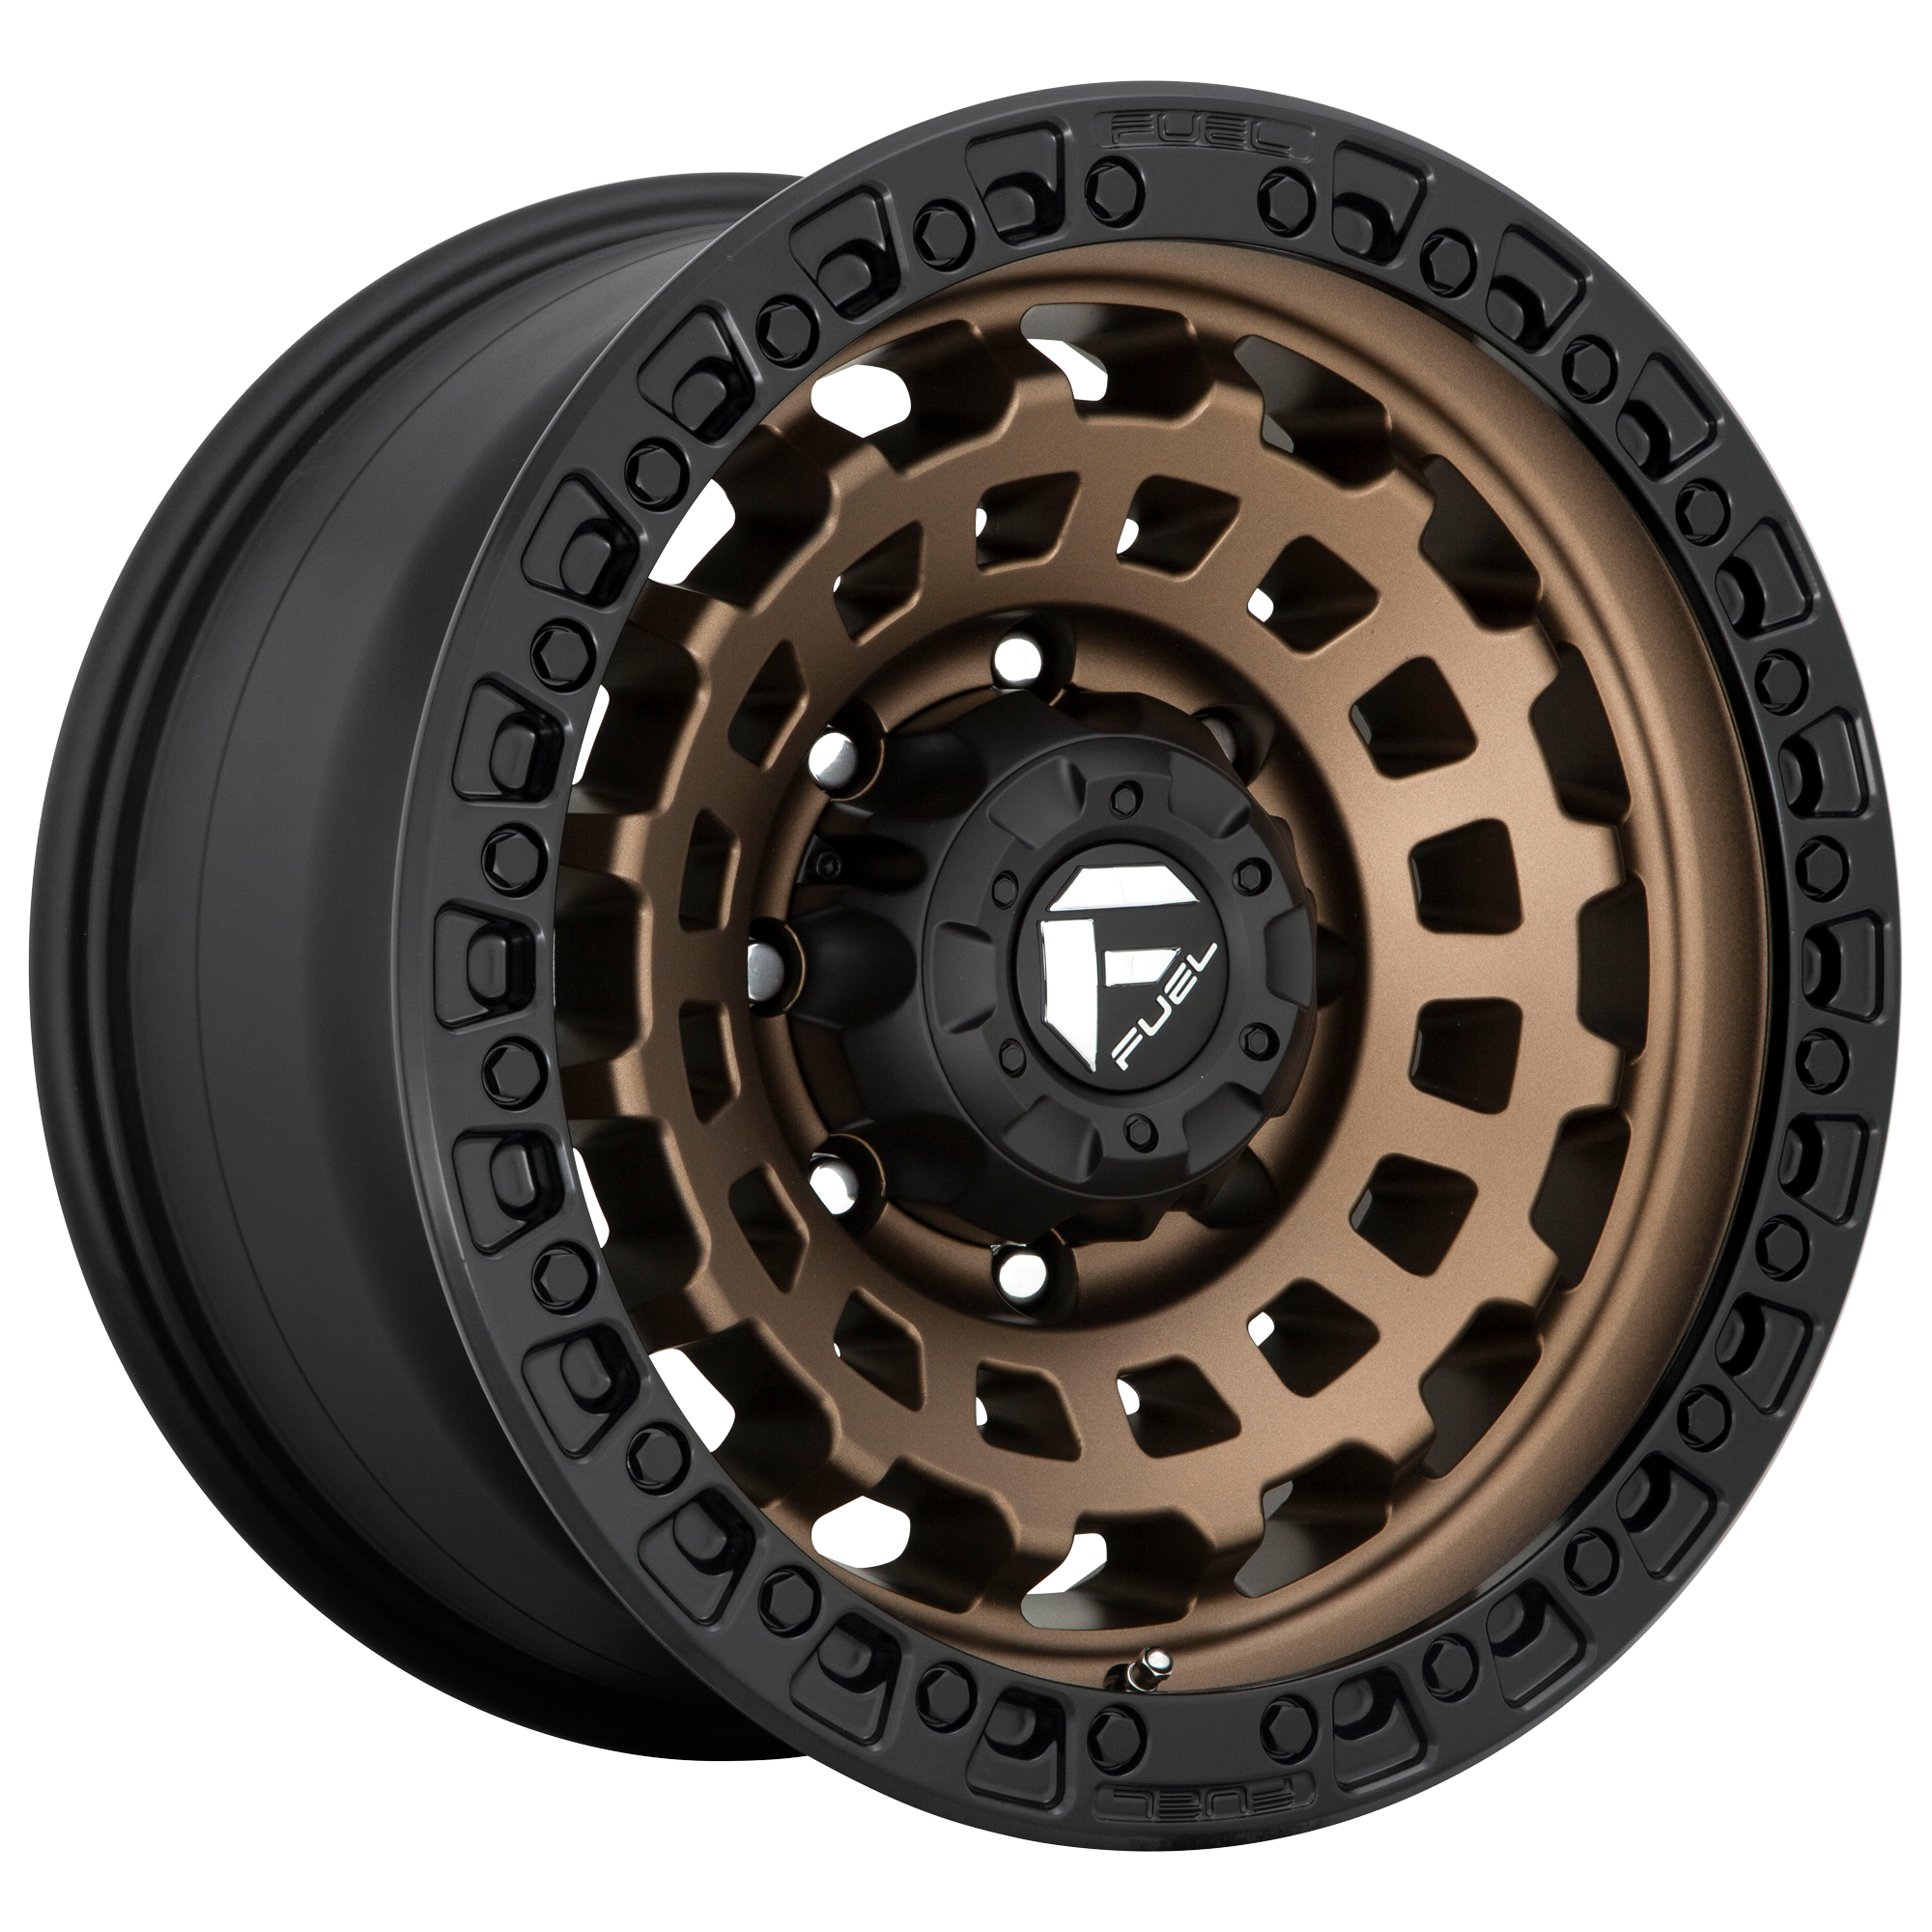 ZEPHYR 20x9 8x170.00 MATTE BRONZE BLACK BEAD RING (1 mm) - Tires and Engine Performance